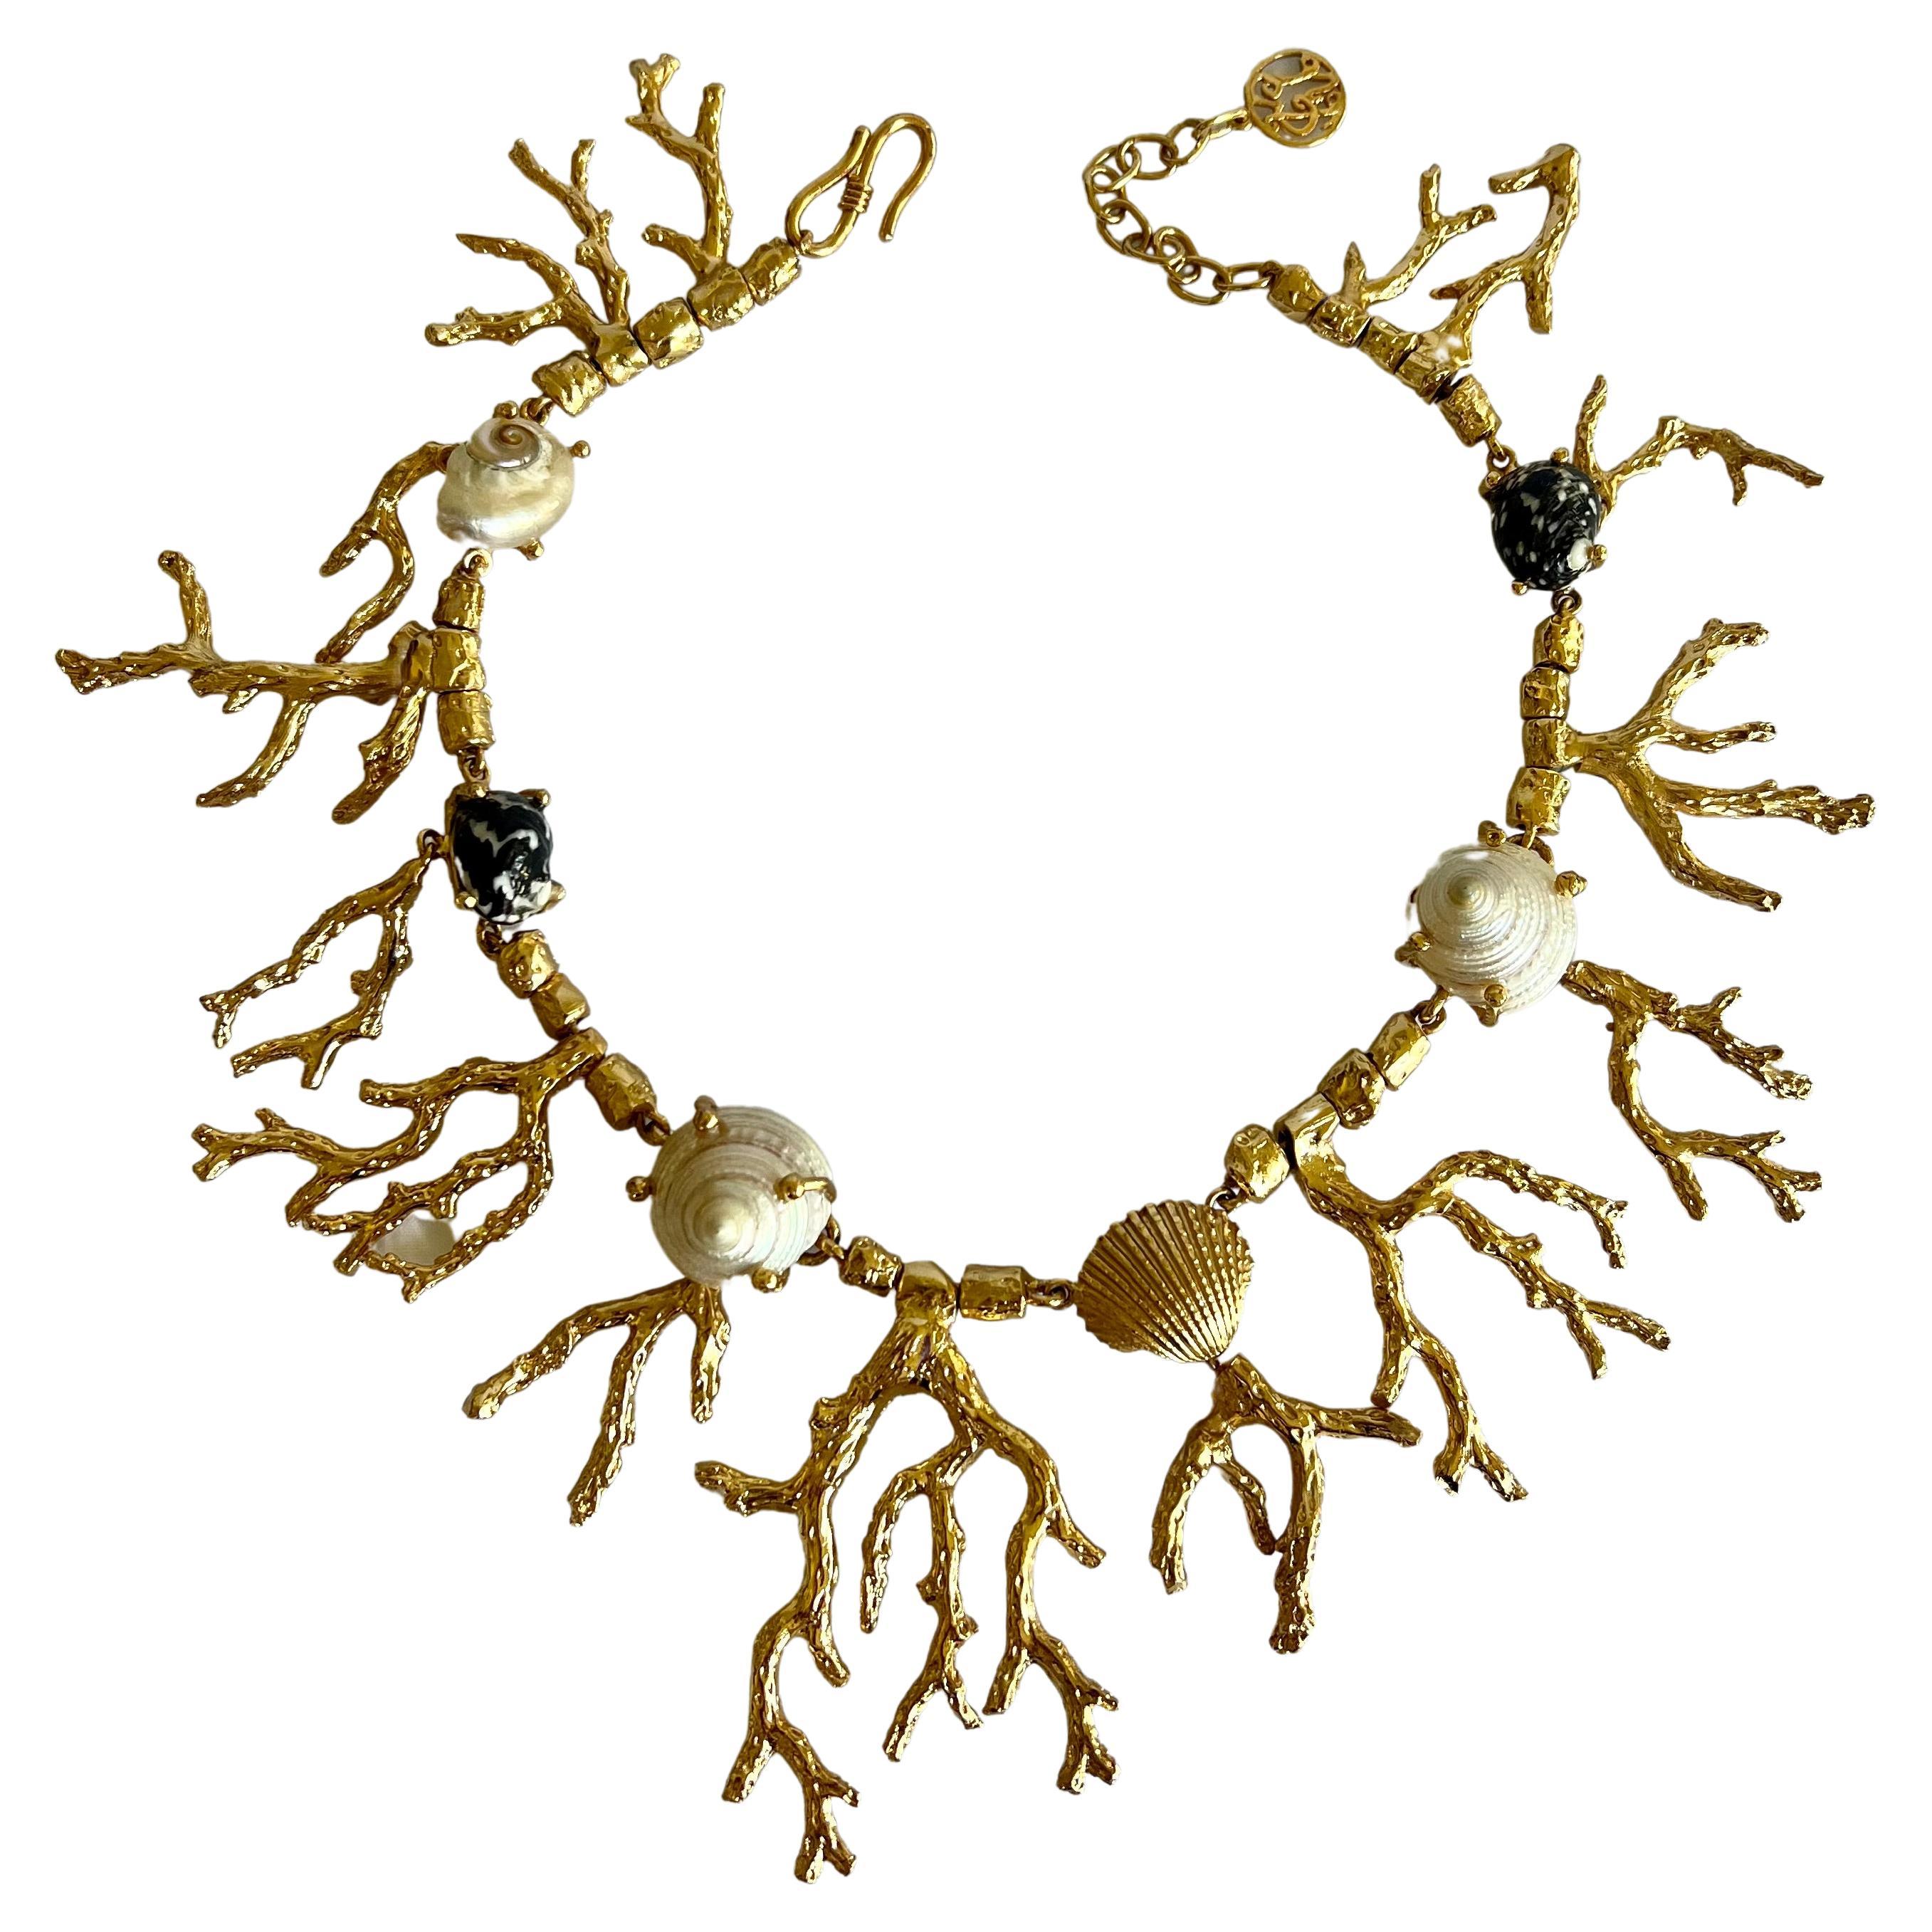 Articulated French Gilt Coral Seashell Necklace 